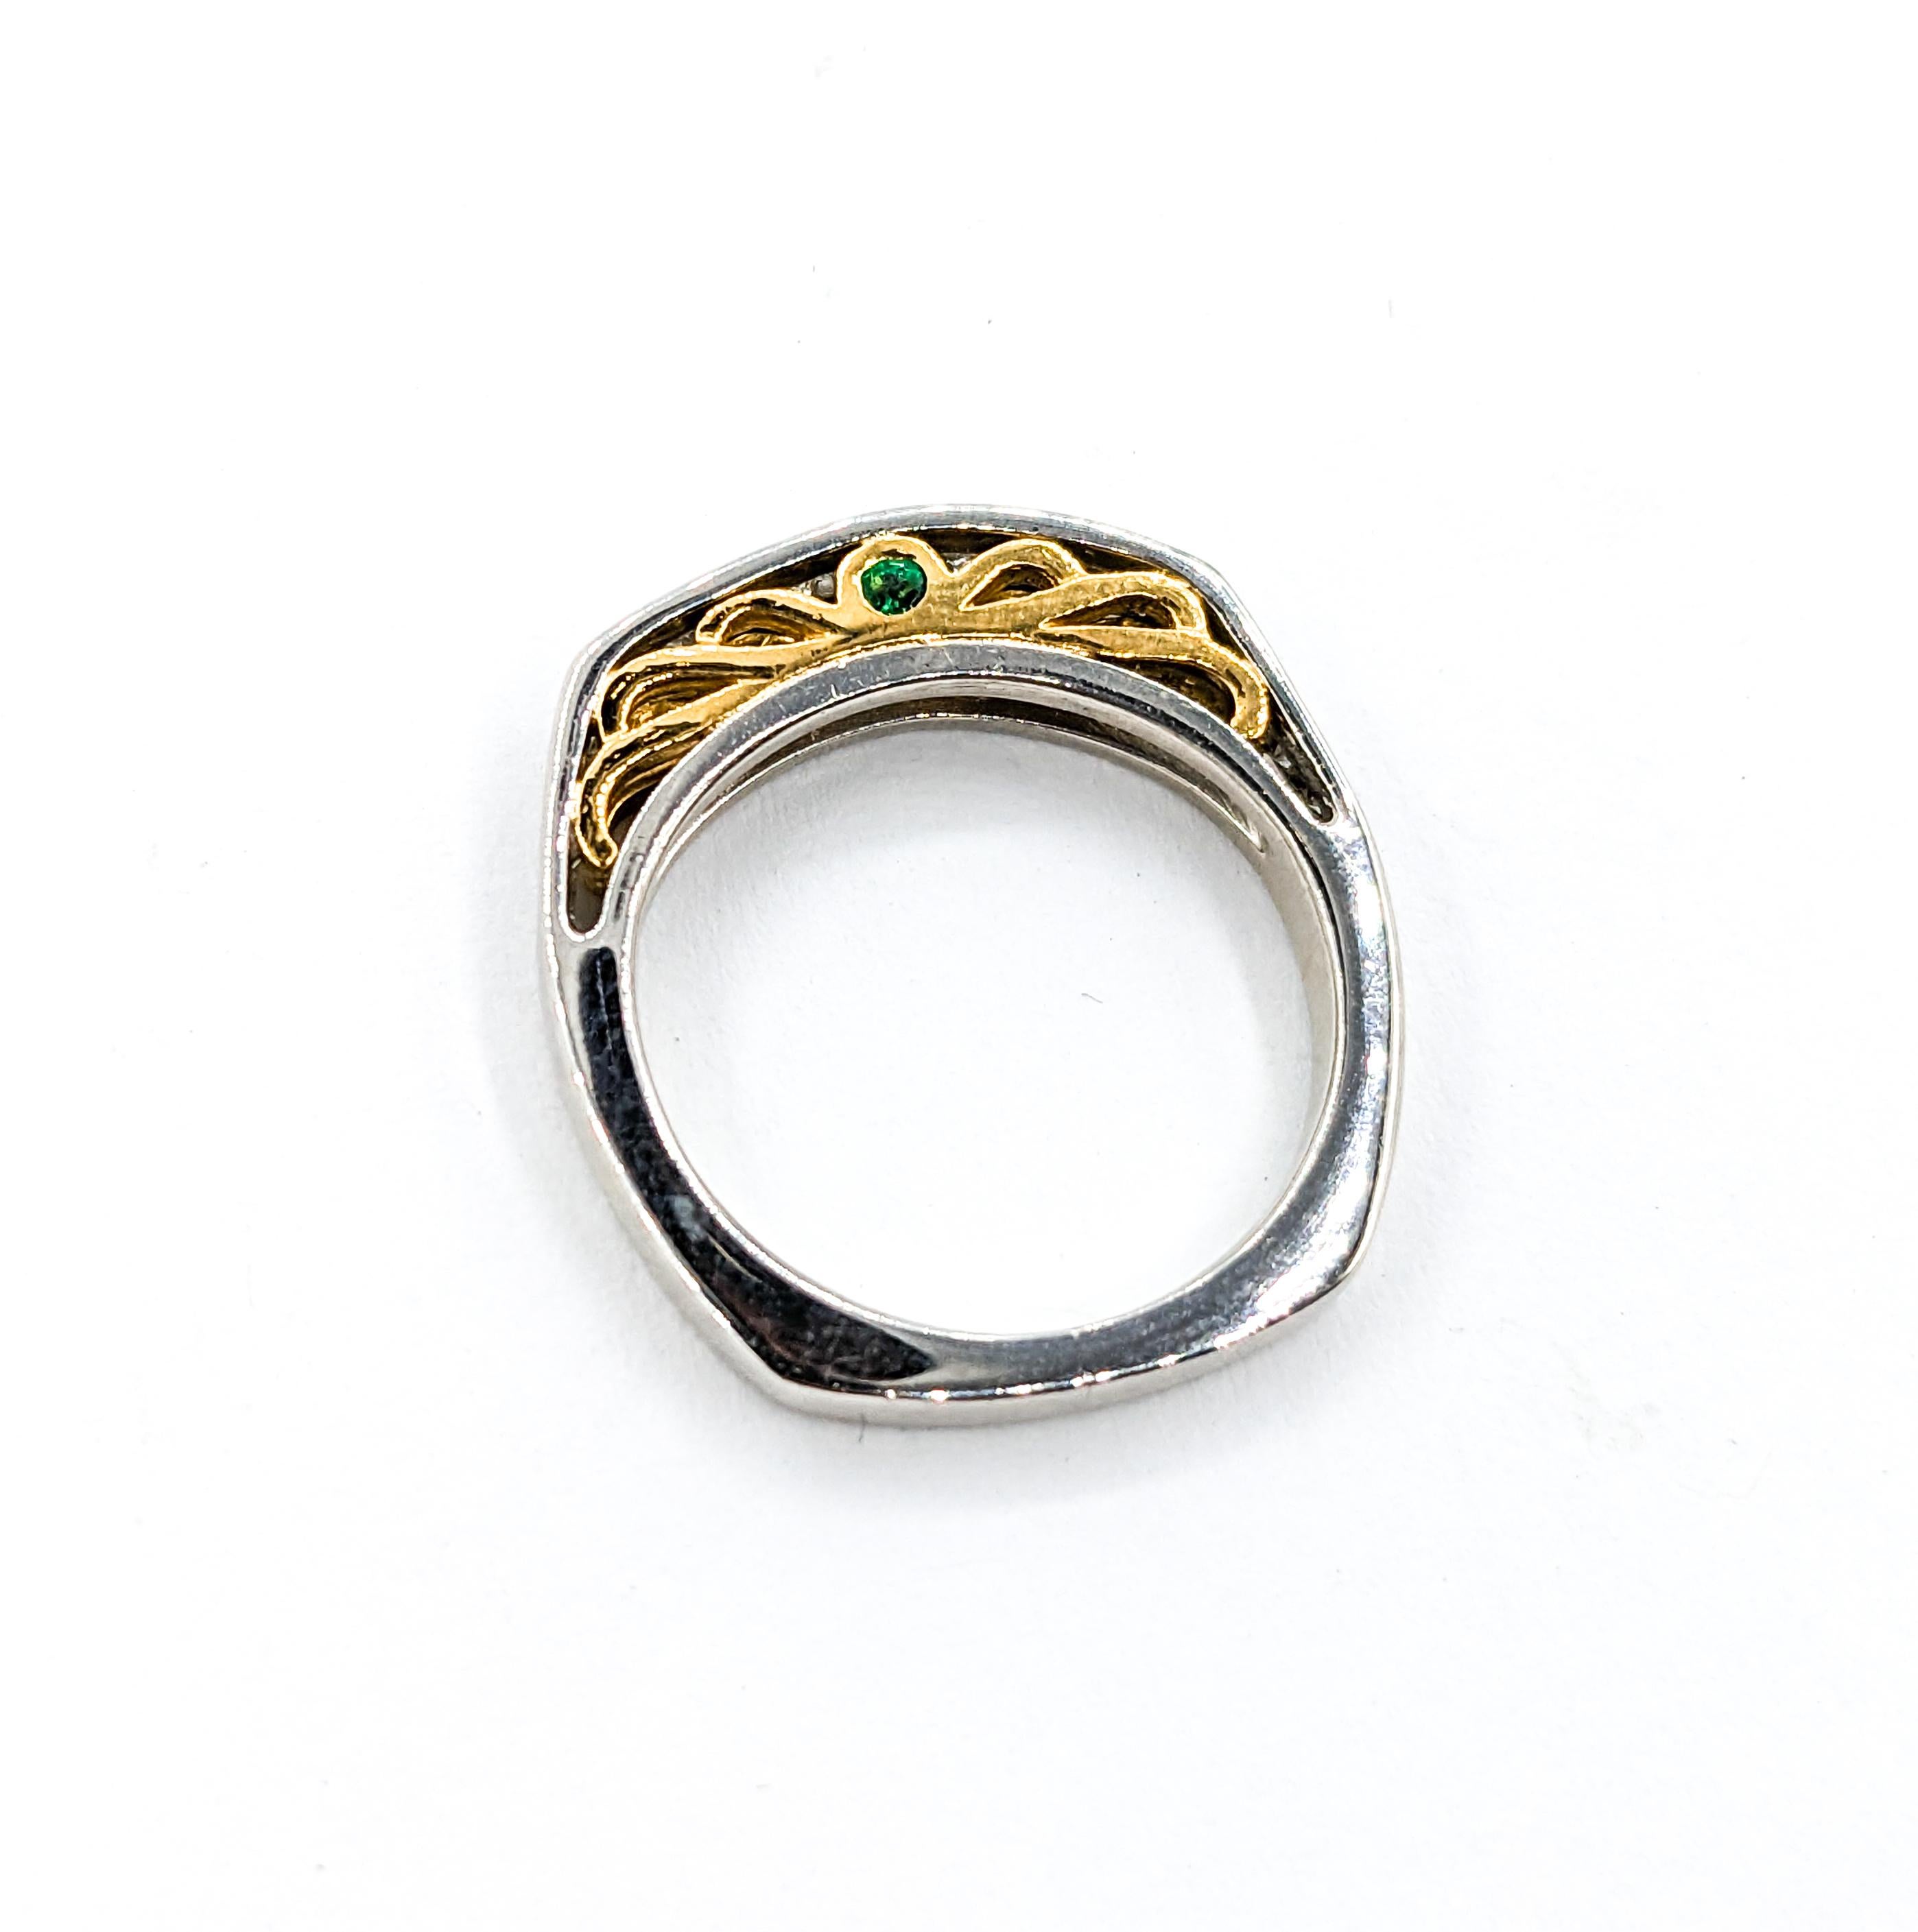 Diamond Channel Ring with Peek-a-boo Emeralds 18k & Platinum In Excellent Condition For Sale In Bloomington, MN